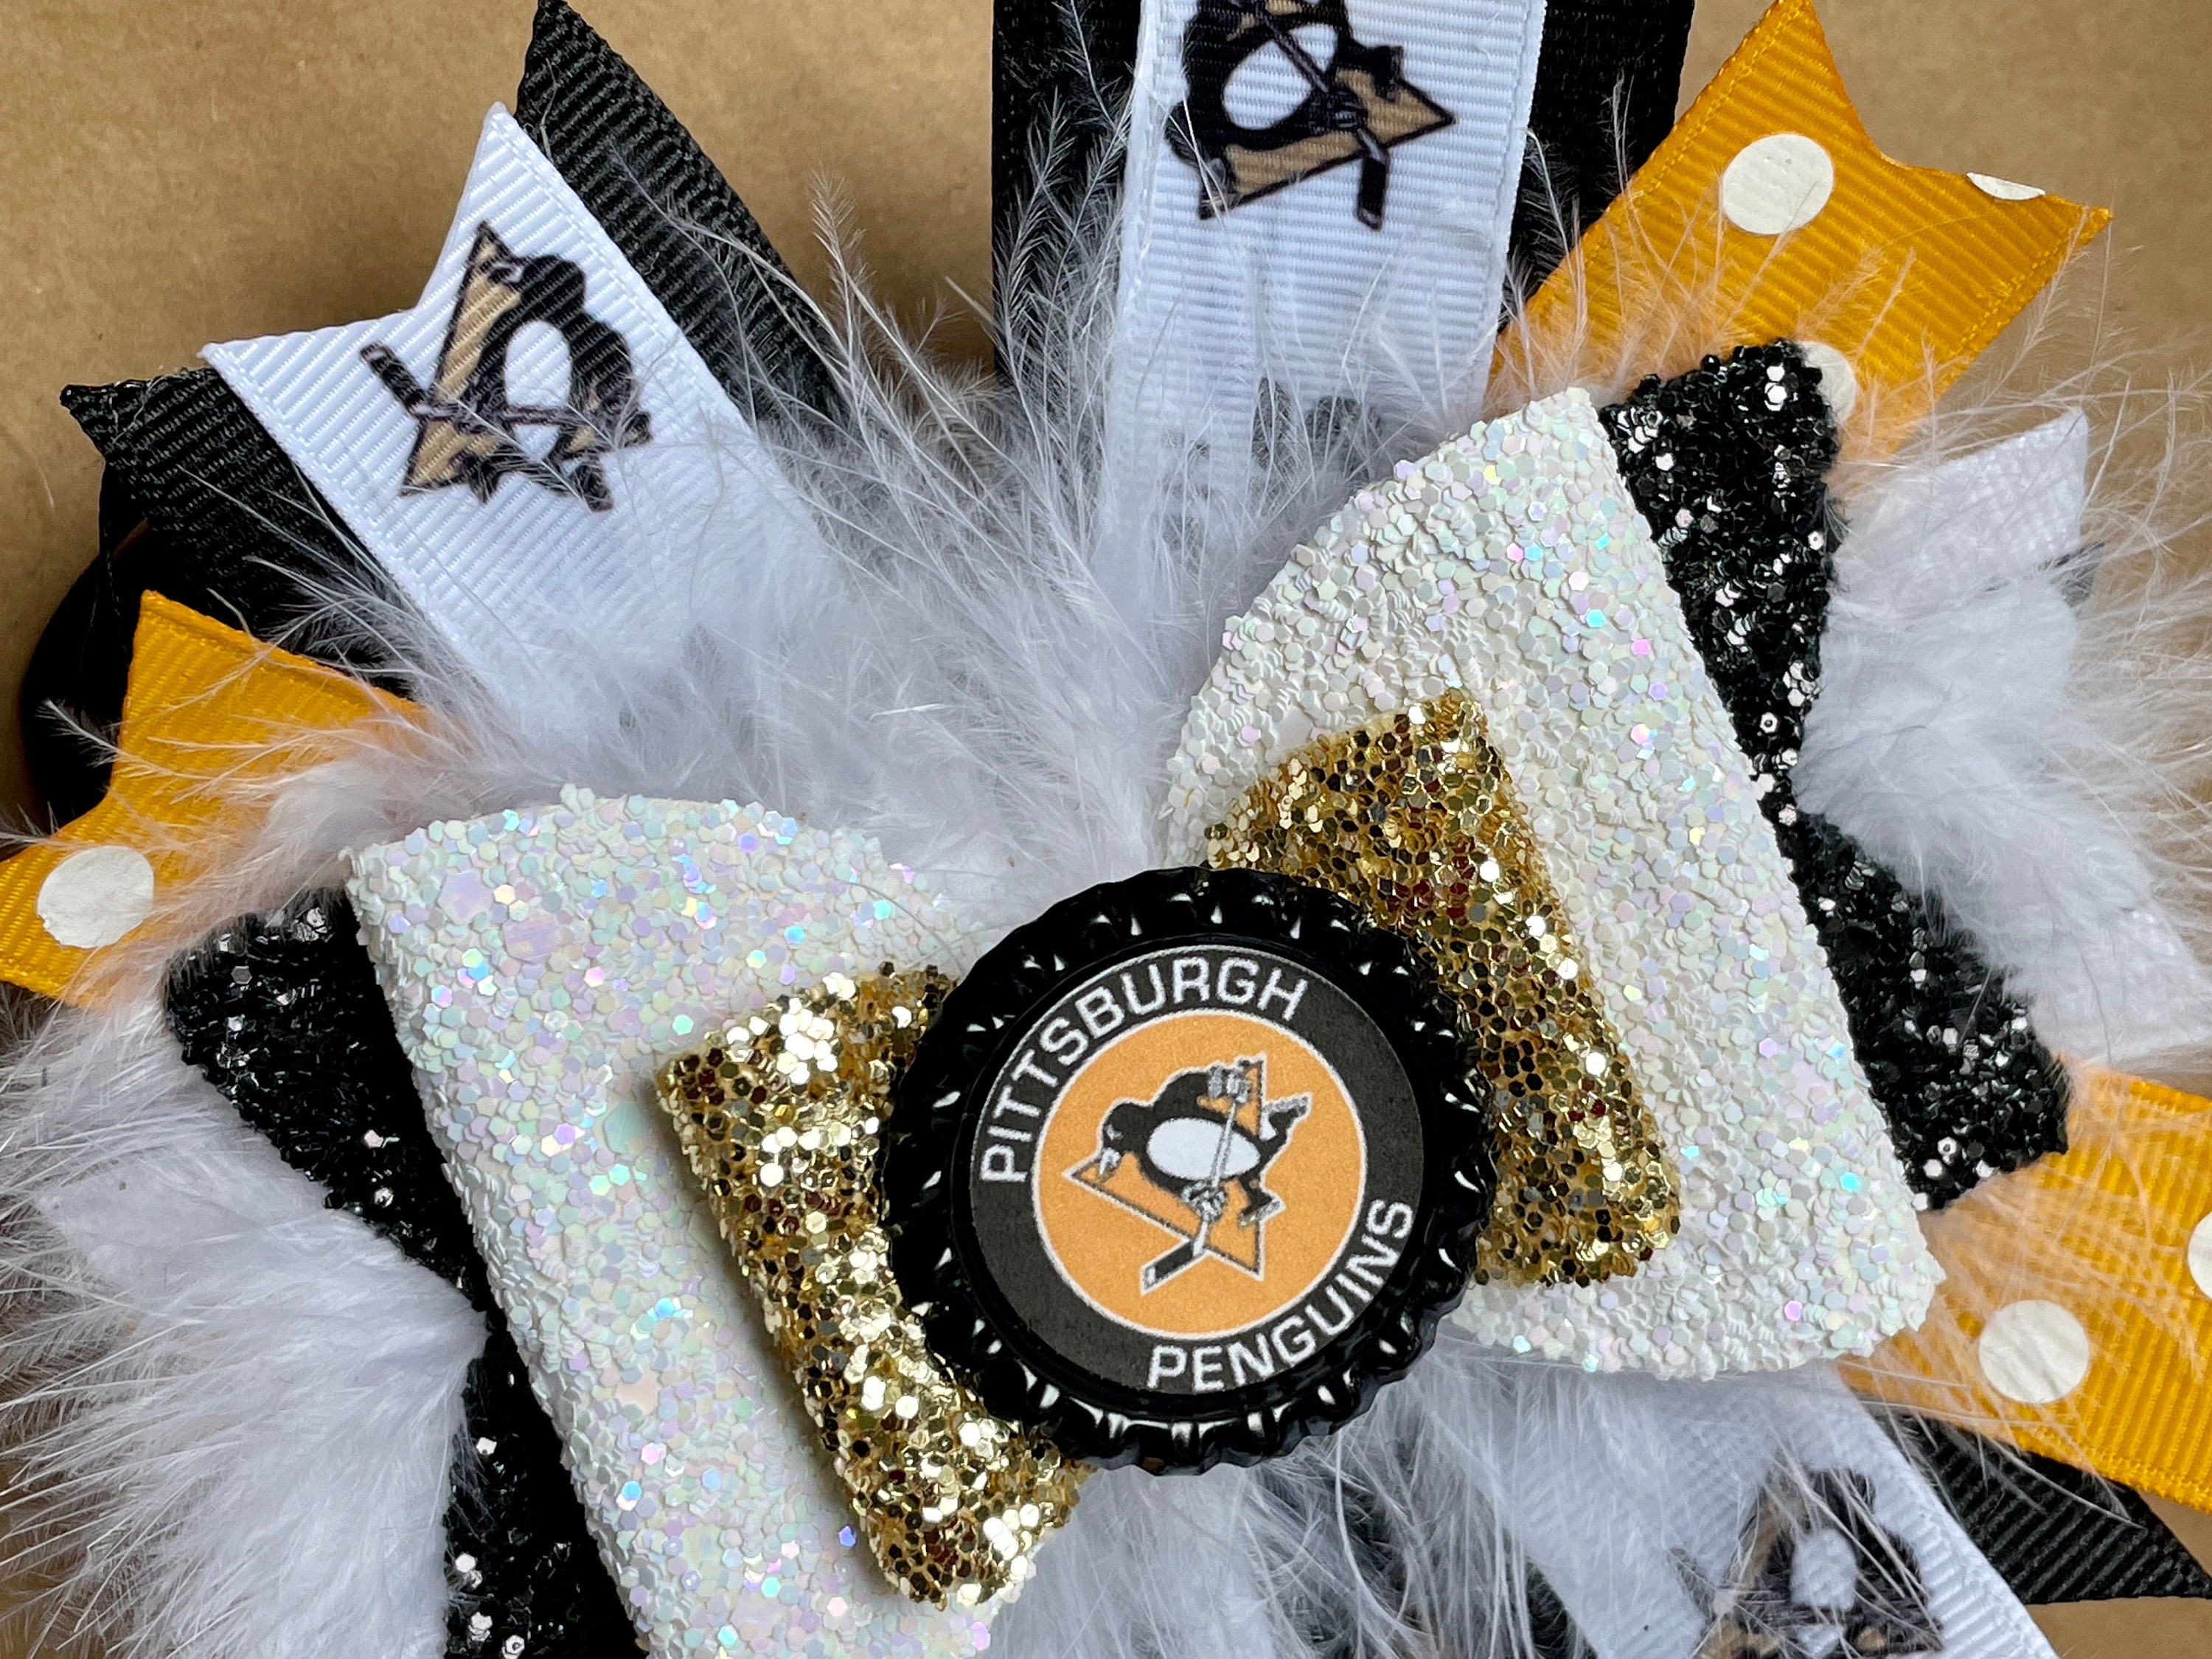 Pittsburgh Penguins Inspired Bow 